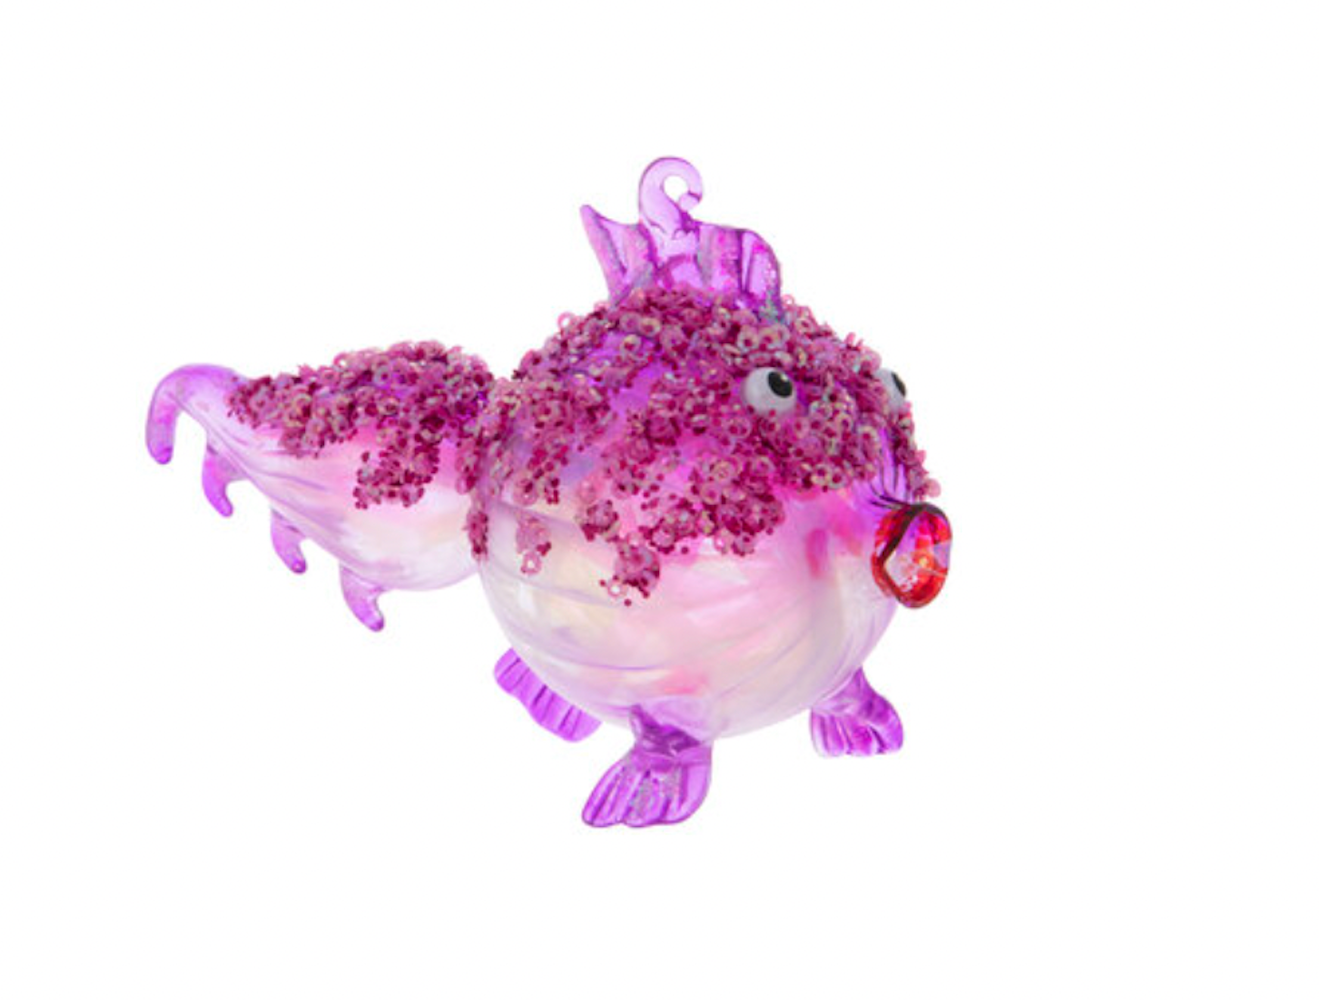 Robert Stanley 2021 Pink Glitter Blowfish Glass Christmas Ornament New with Tag